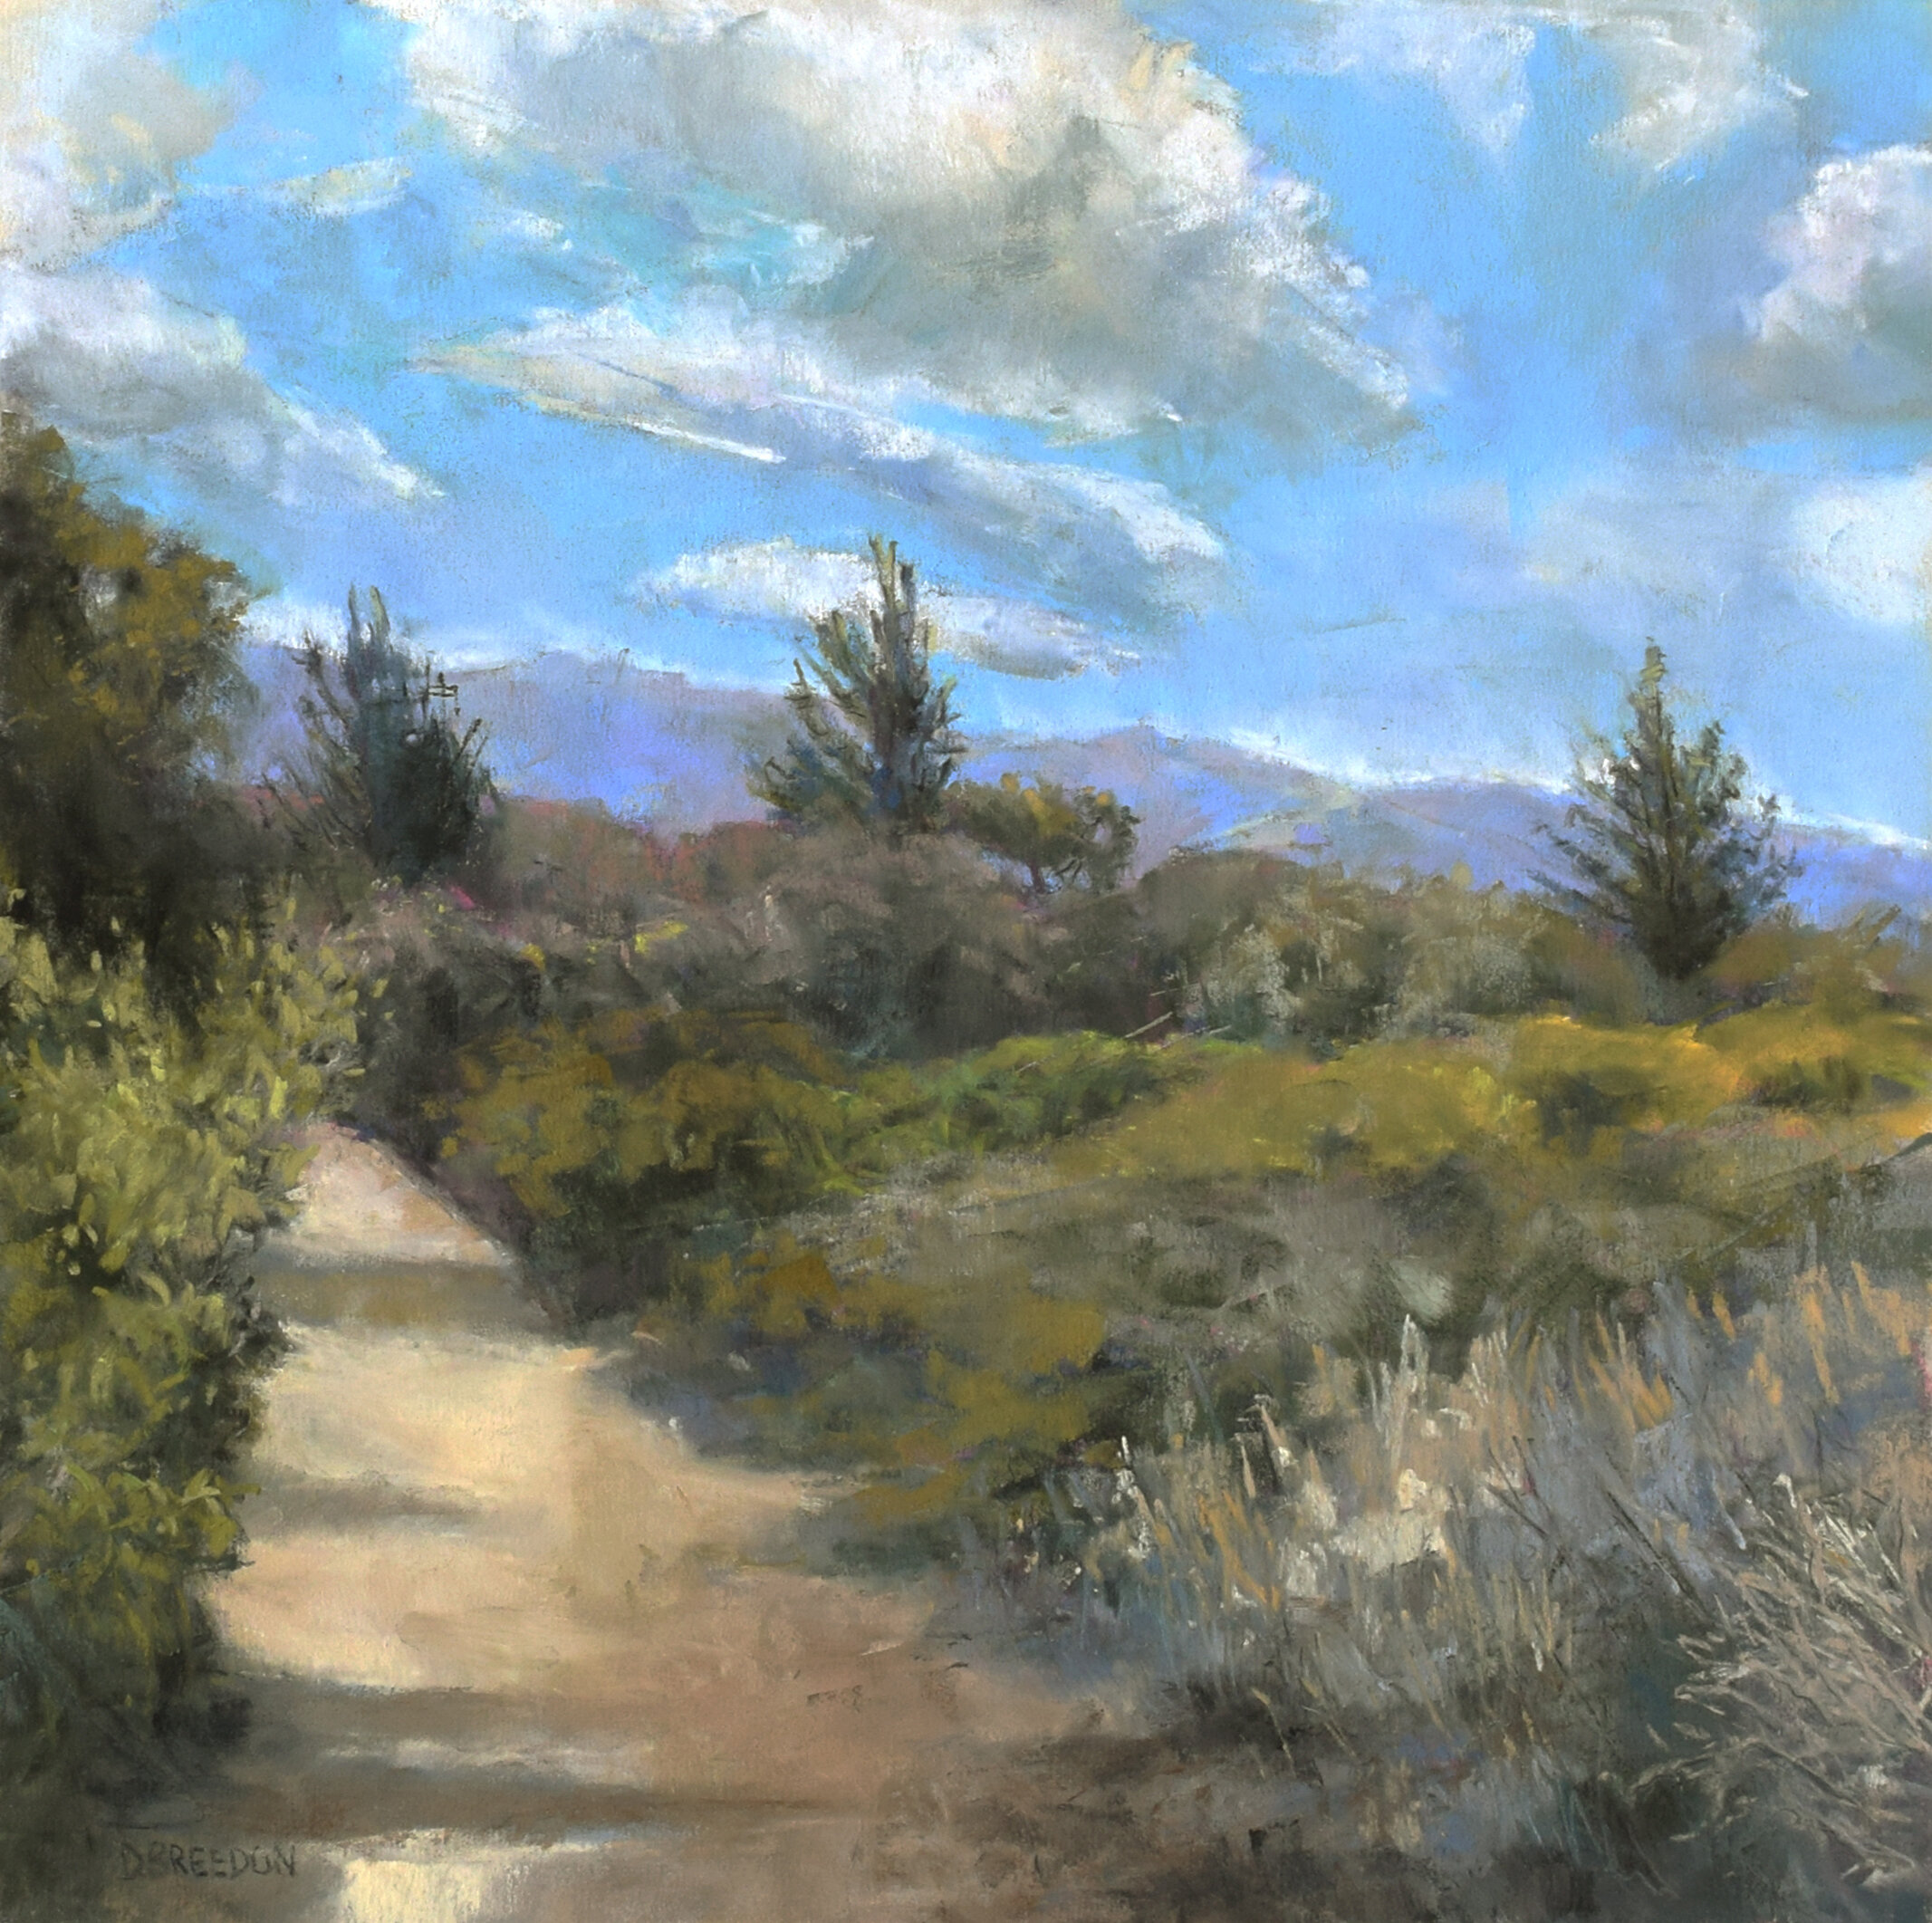 Deborah Breedon, "After the Storm, La Purisima Mission Trail from Rucker Road," Pastel on sanded paper